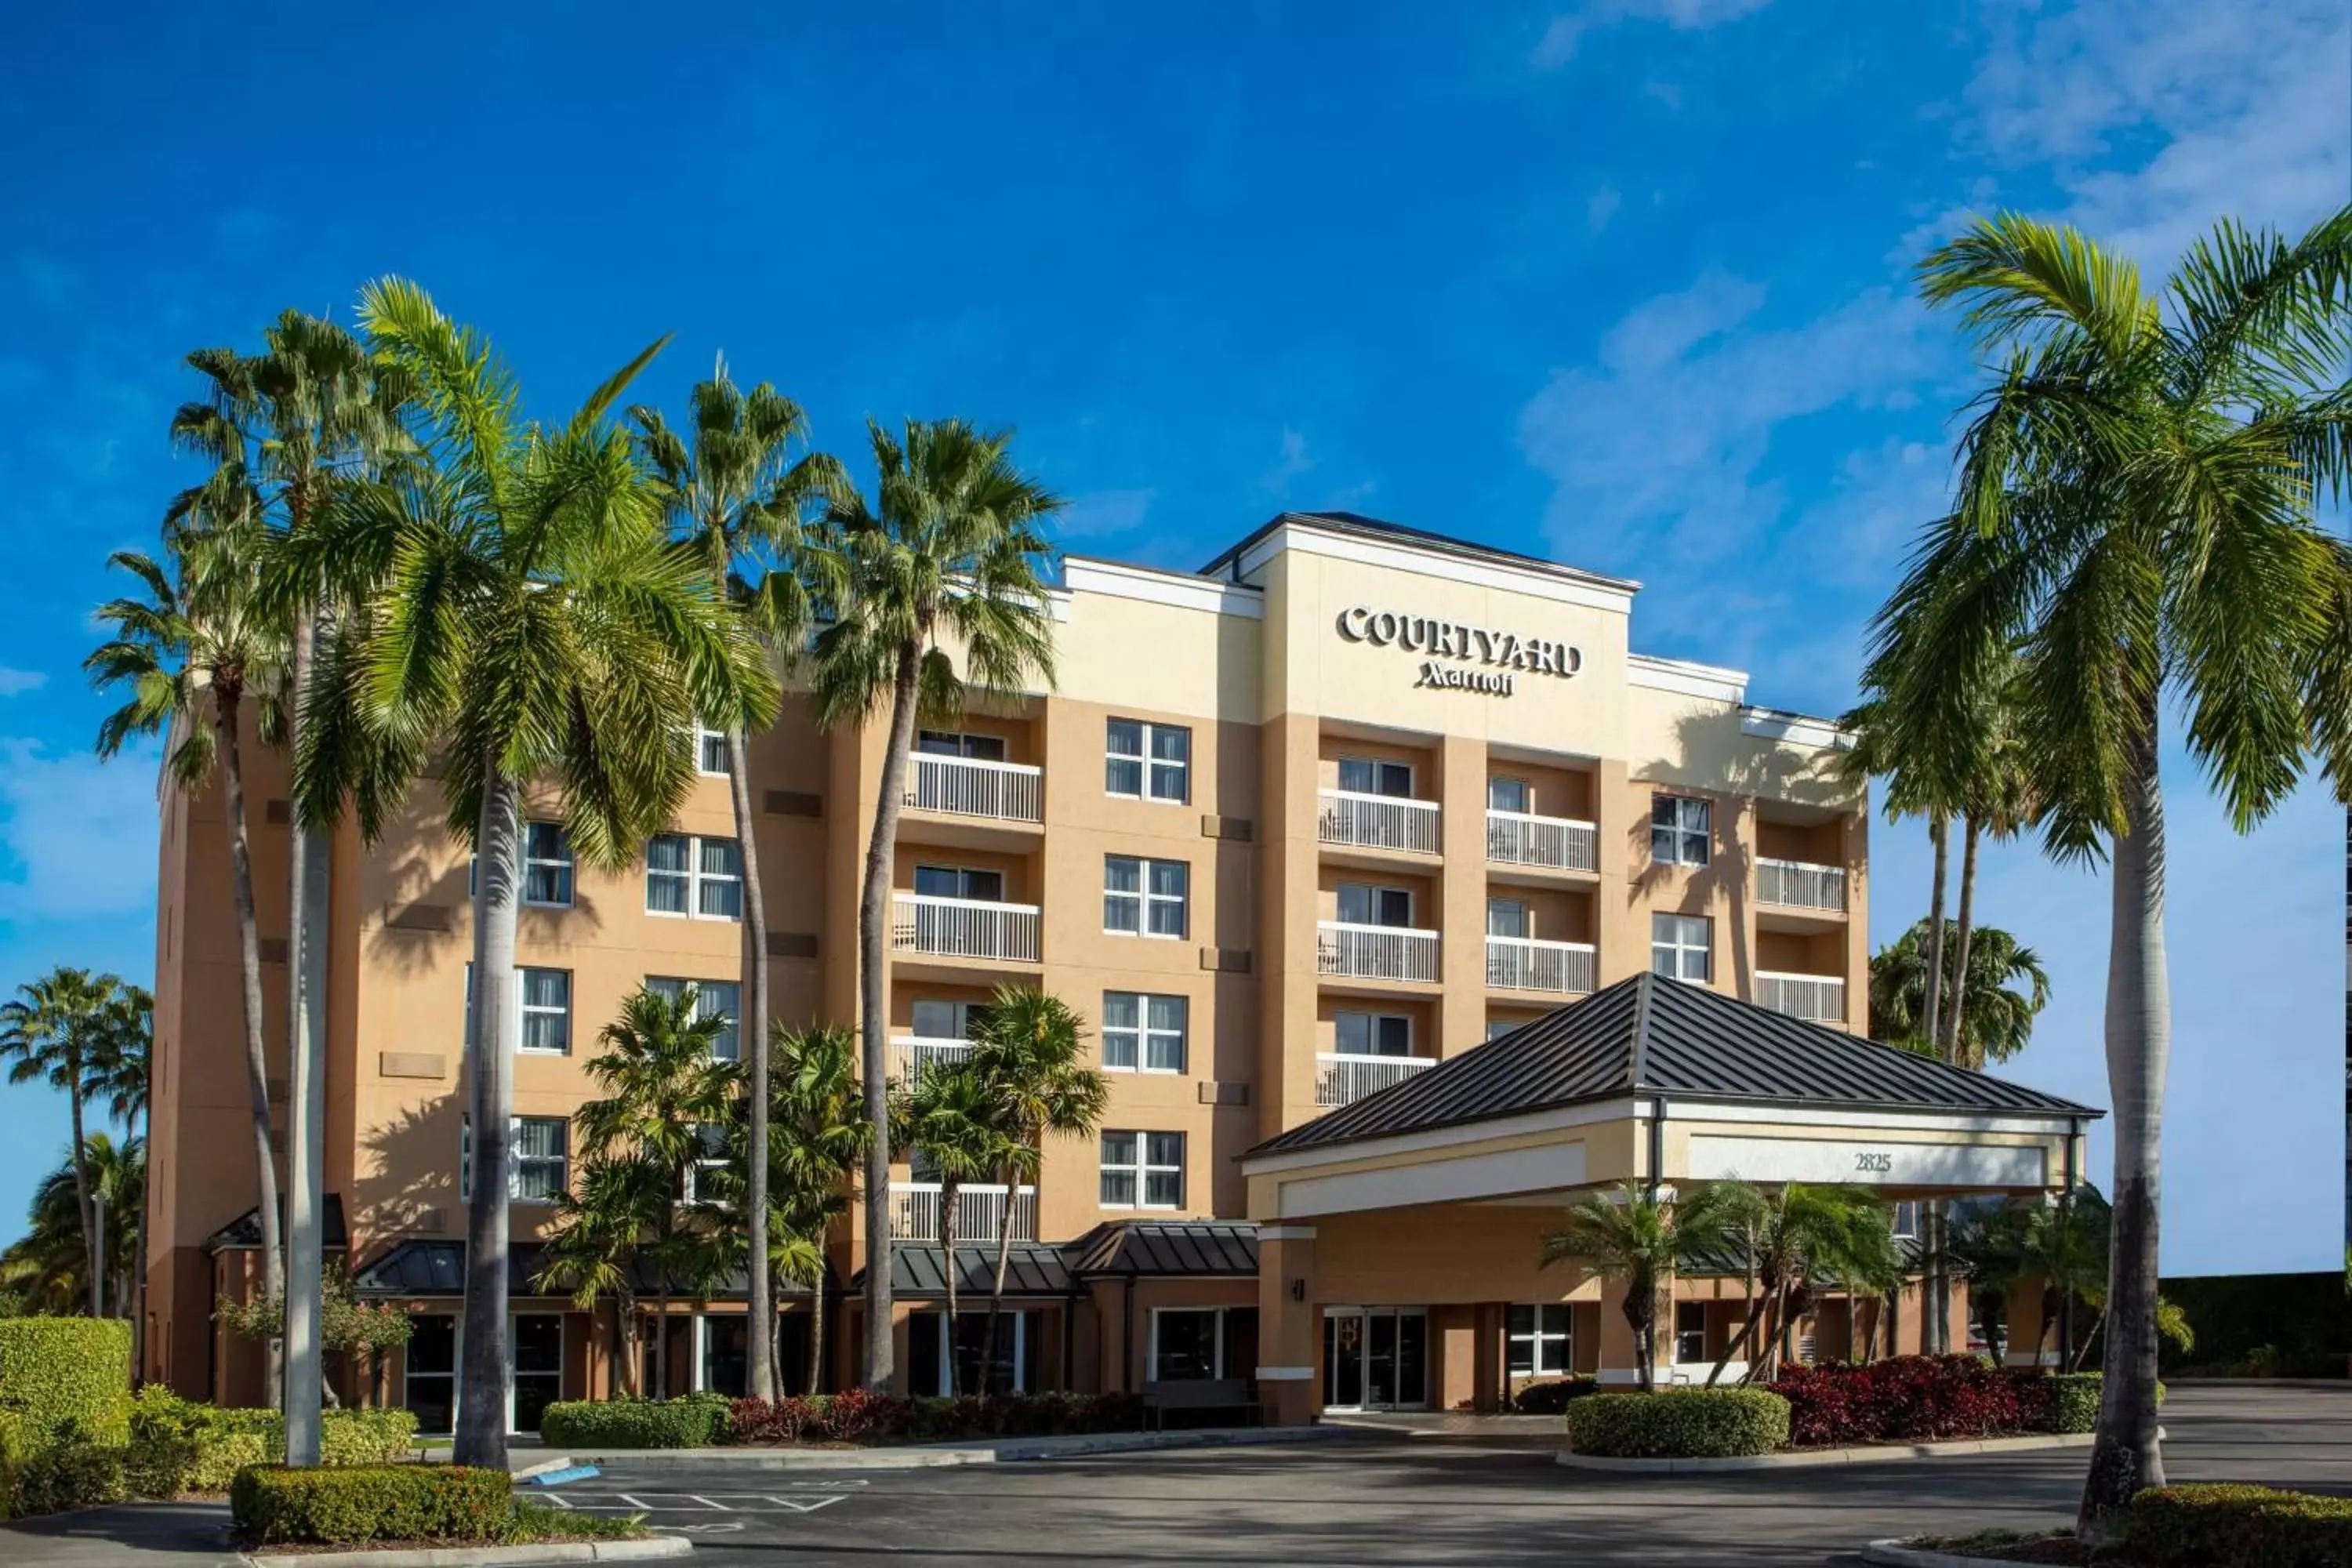 Property Building in Courtyard by Marriott Miami Aventura Mall